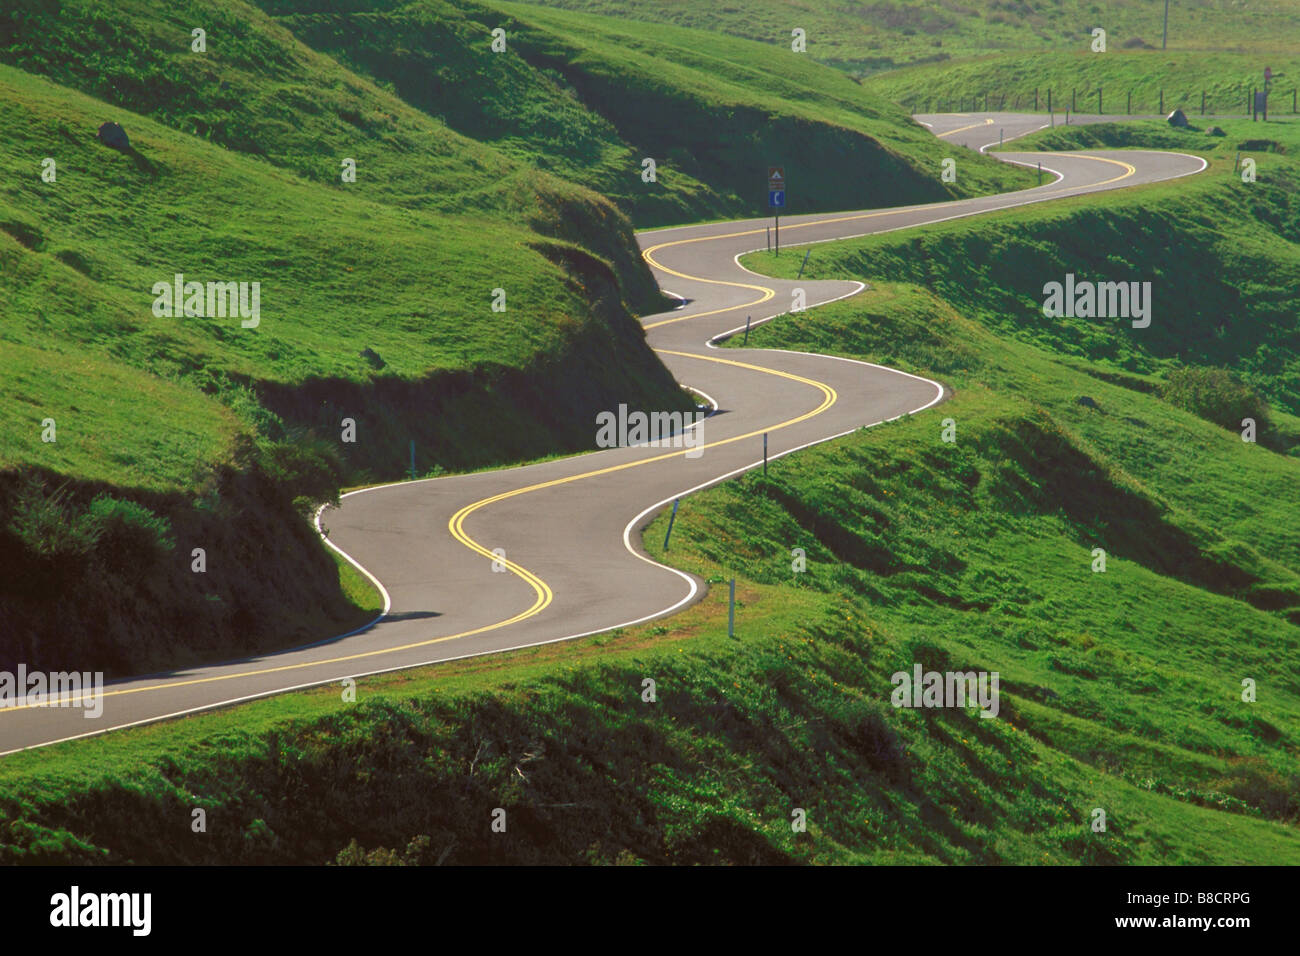 FV0277, Ron Watts; Winding country road, summer Stock Photo